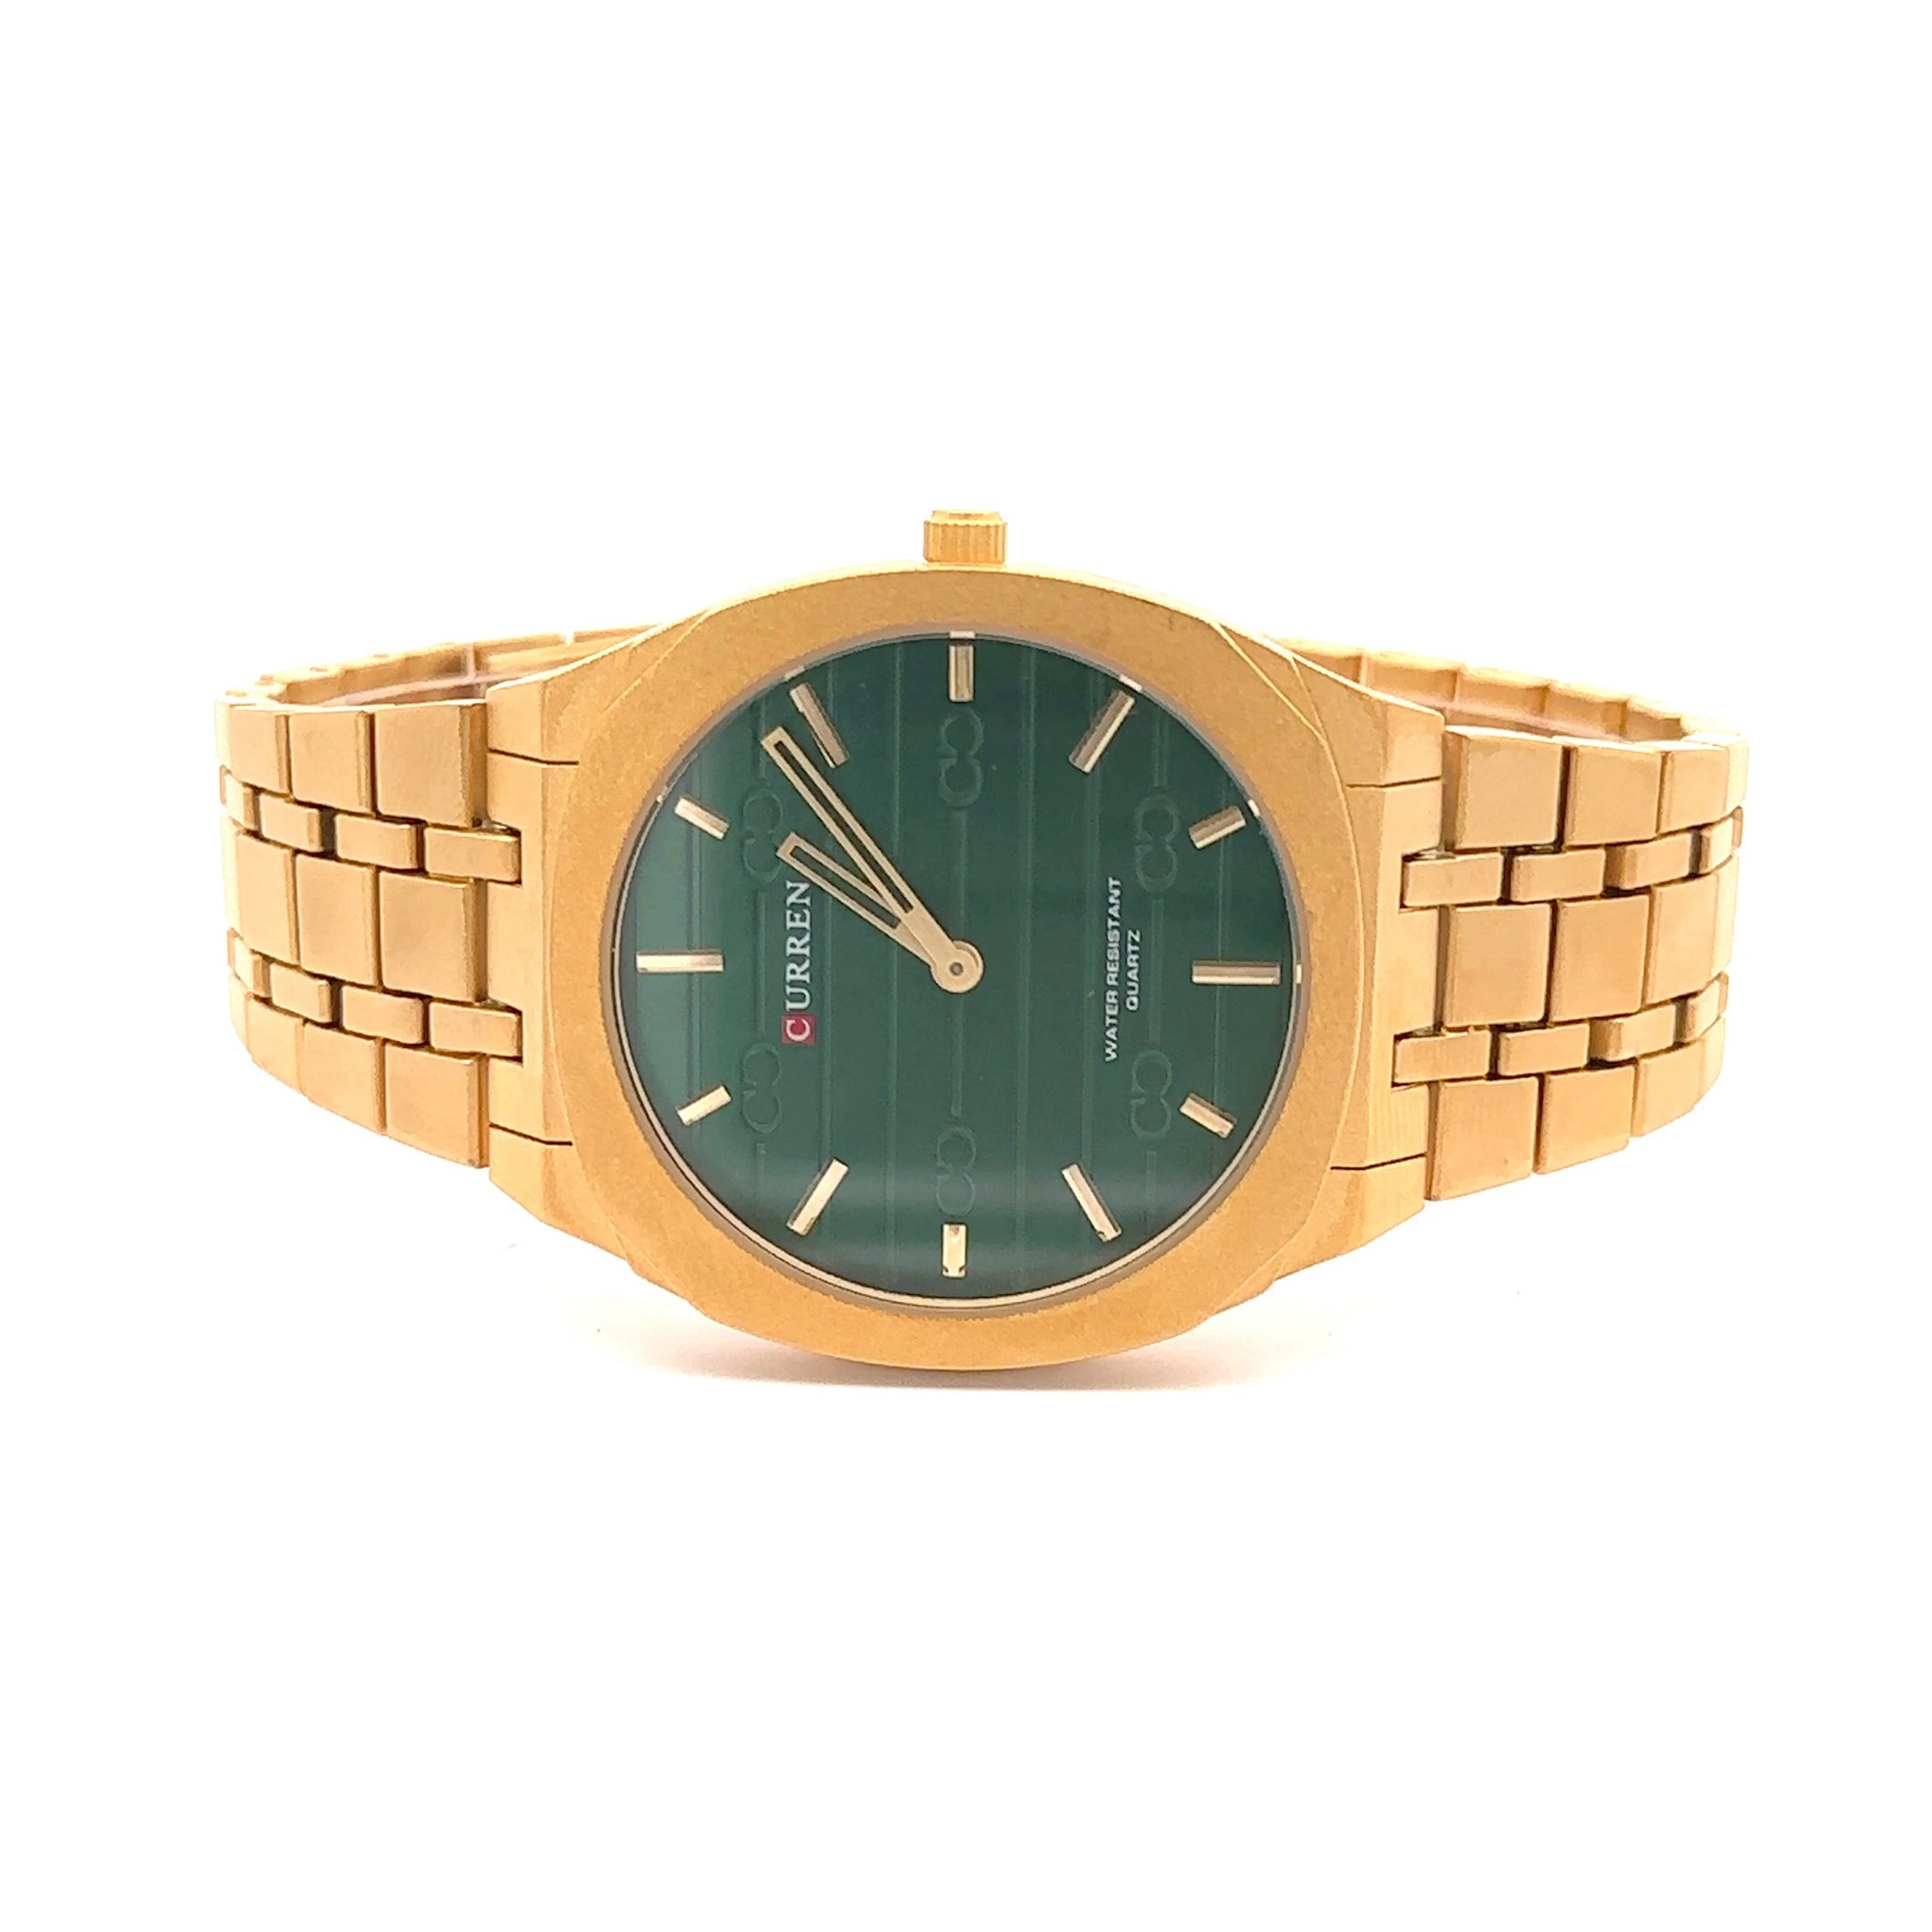 OBFUSCATE METAL BACK GOLD GREEN STAINLESS ICED OUT WATCH I 5516522